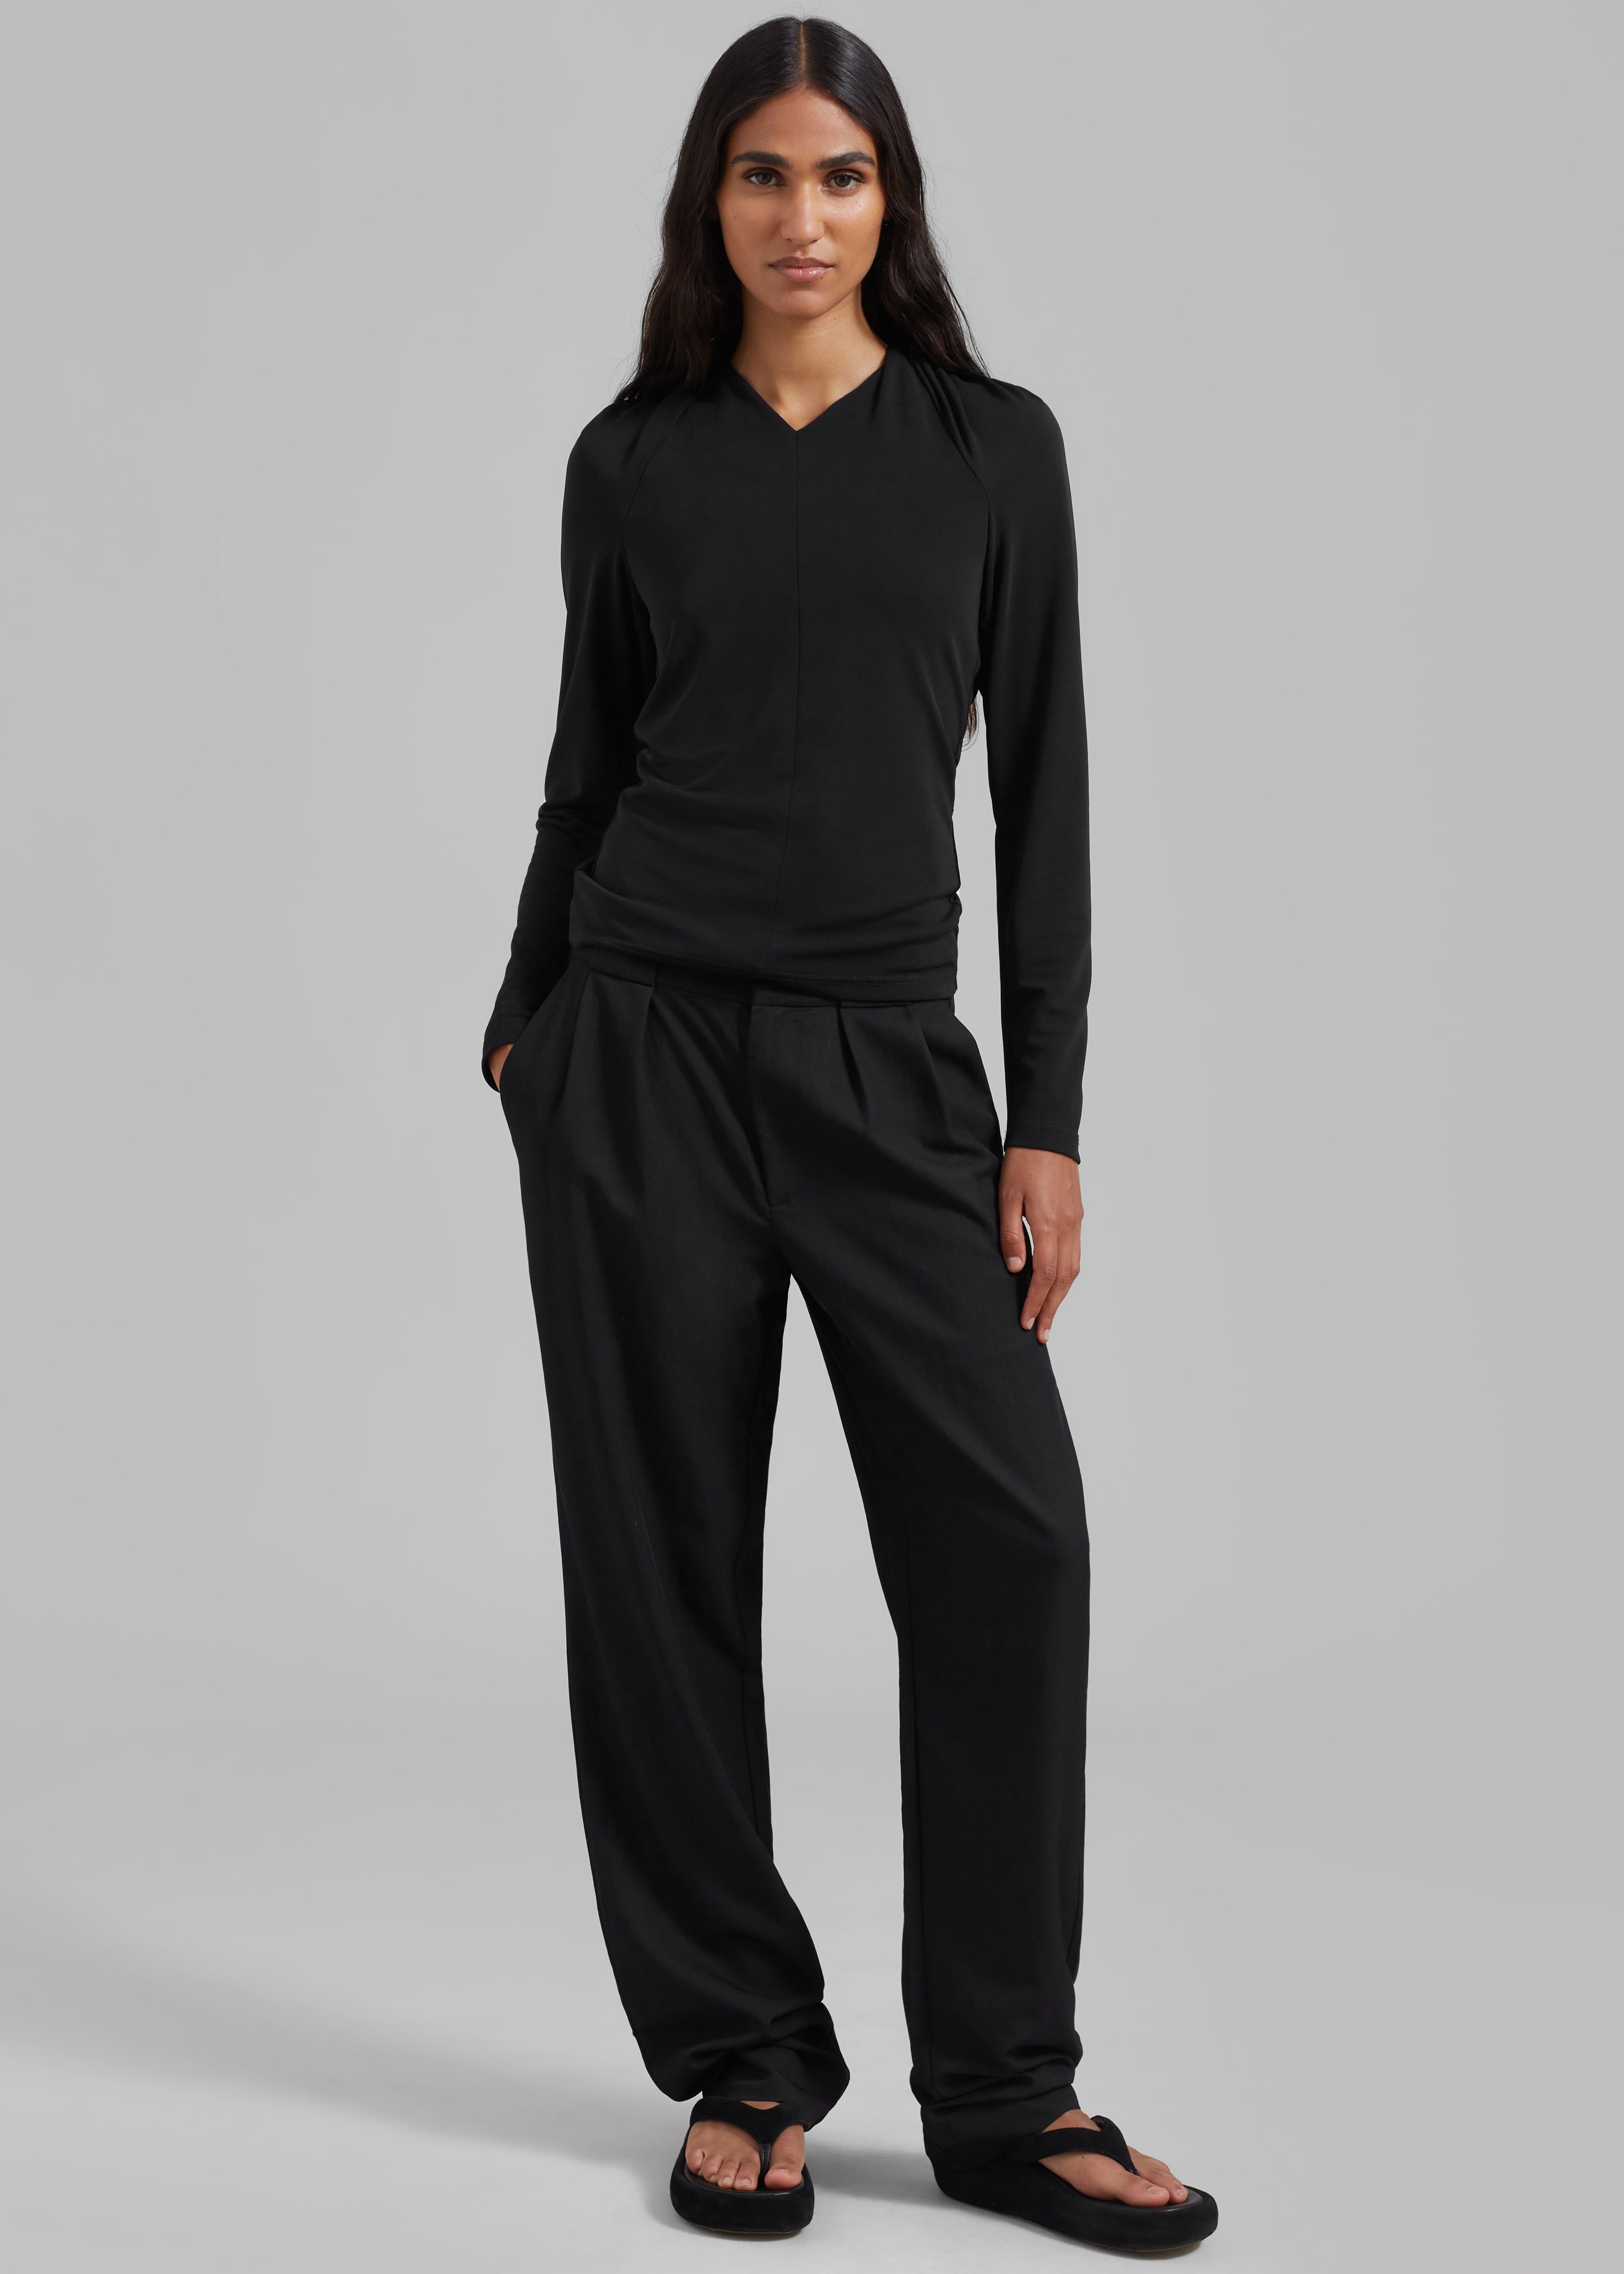 Proenza Schouler White Label Drapey Suiting Trousers - Black - 2